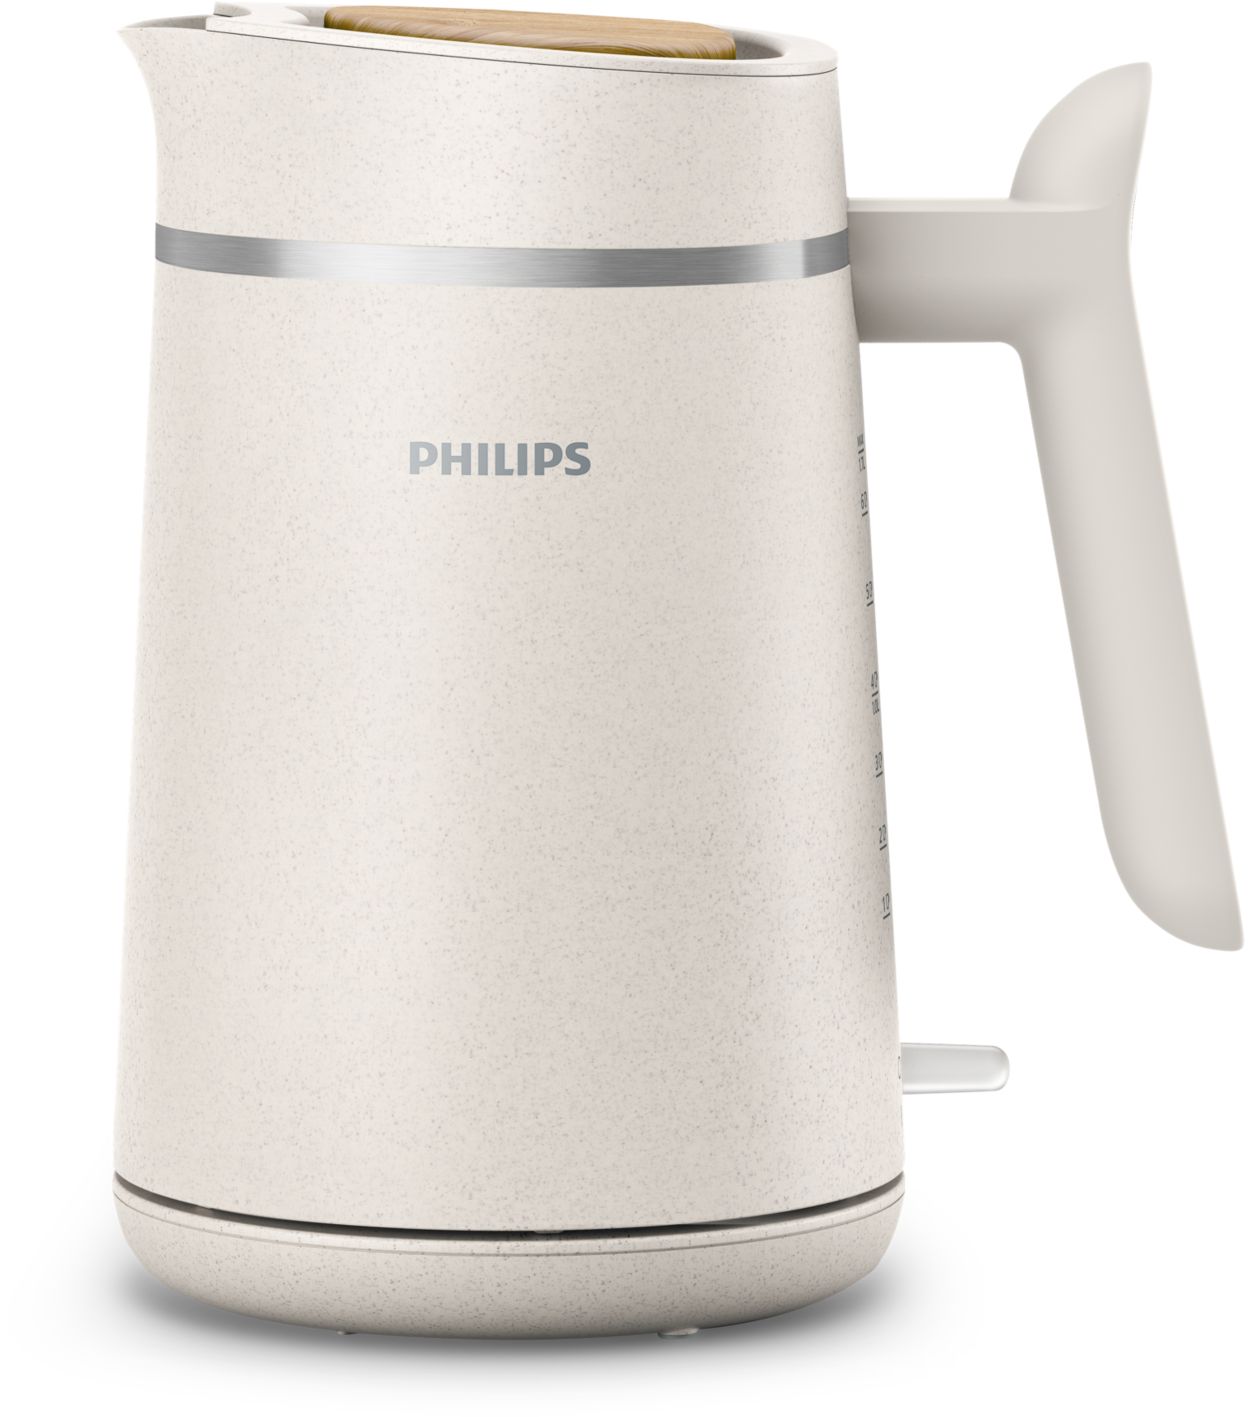 https://images.philips.com/is/image/philipsconsumer/921b4402a8e447718d61ad80008ce2ef?$jpglarge$&wid=1250